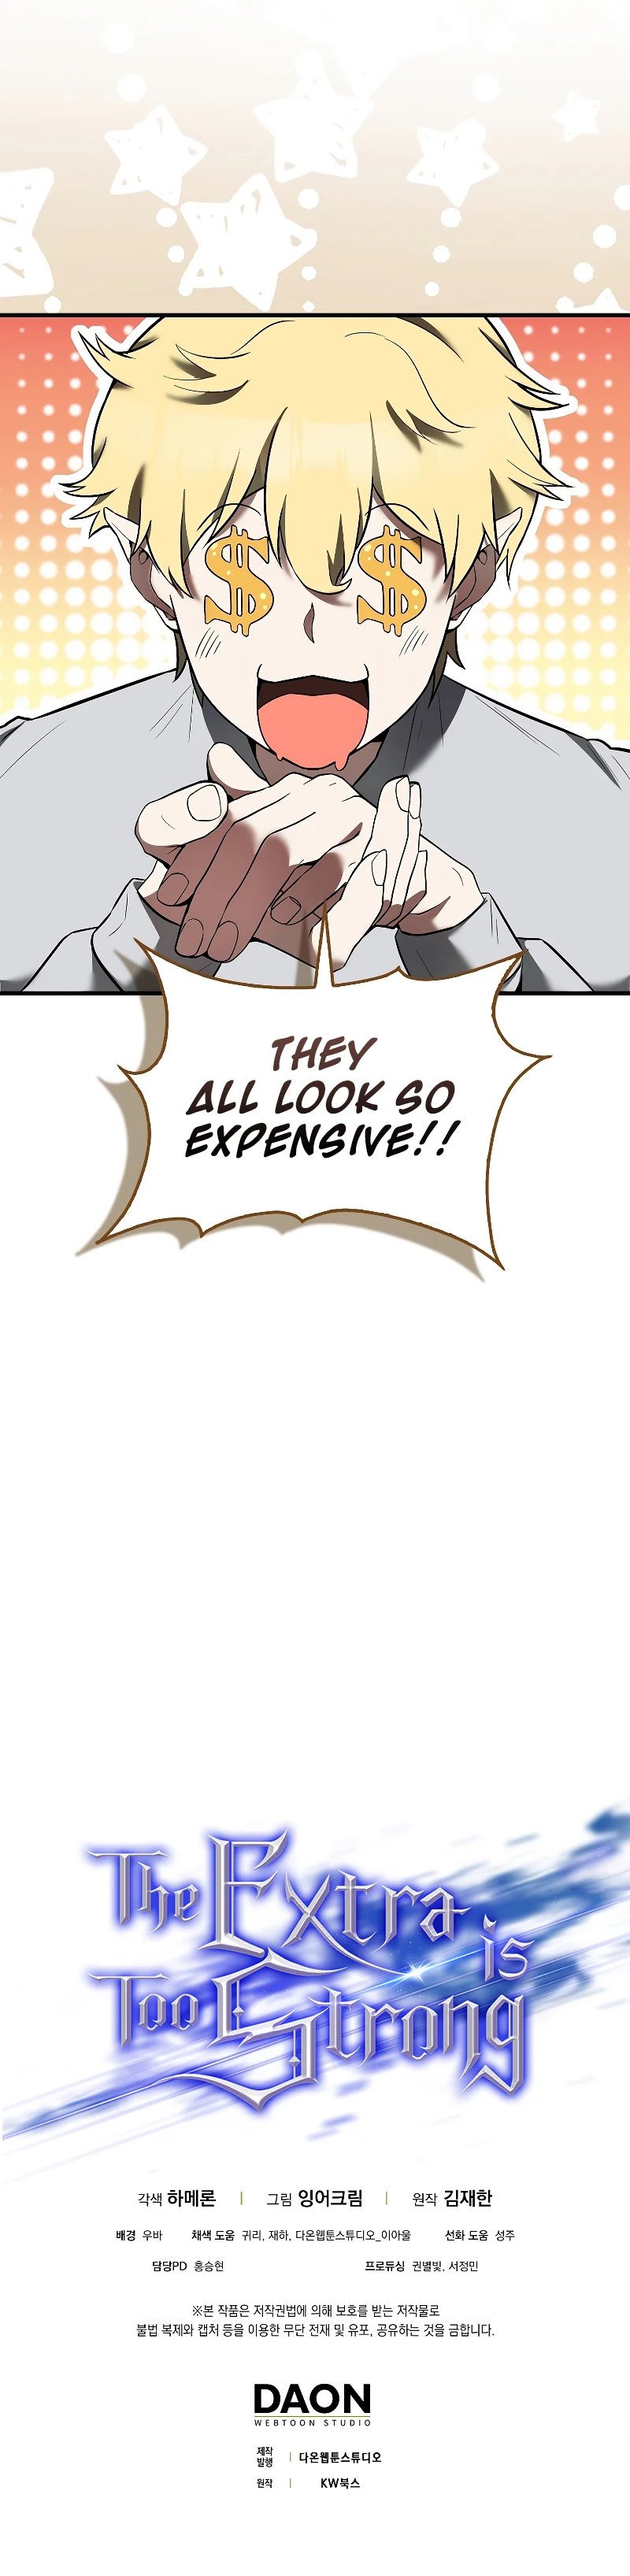 the-extra-is-too-strong-chap-31-11